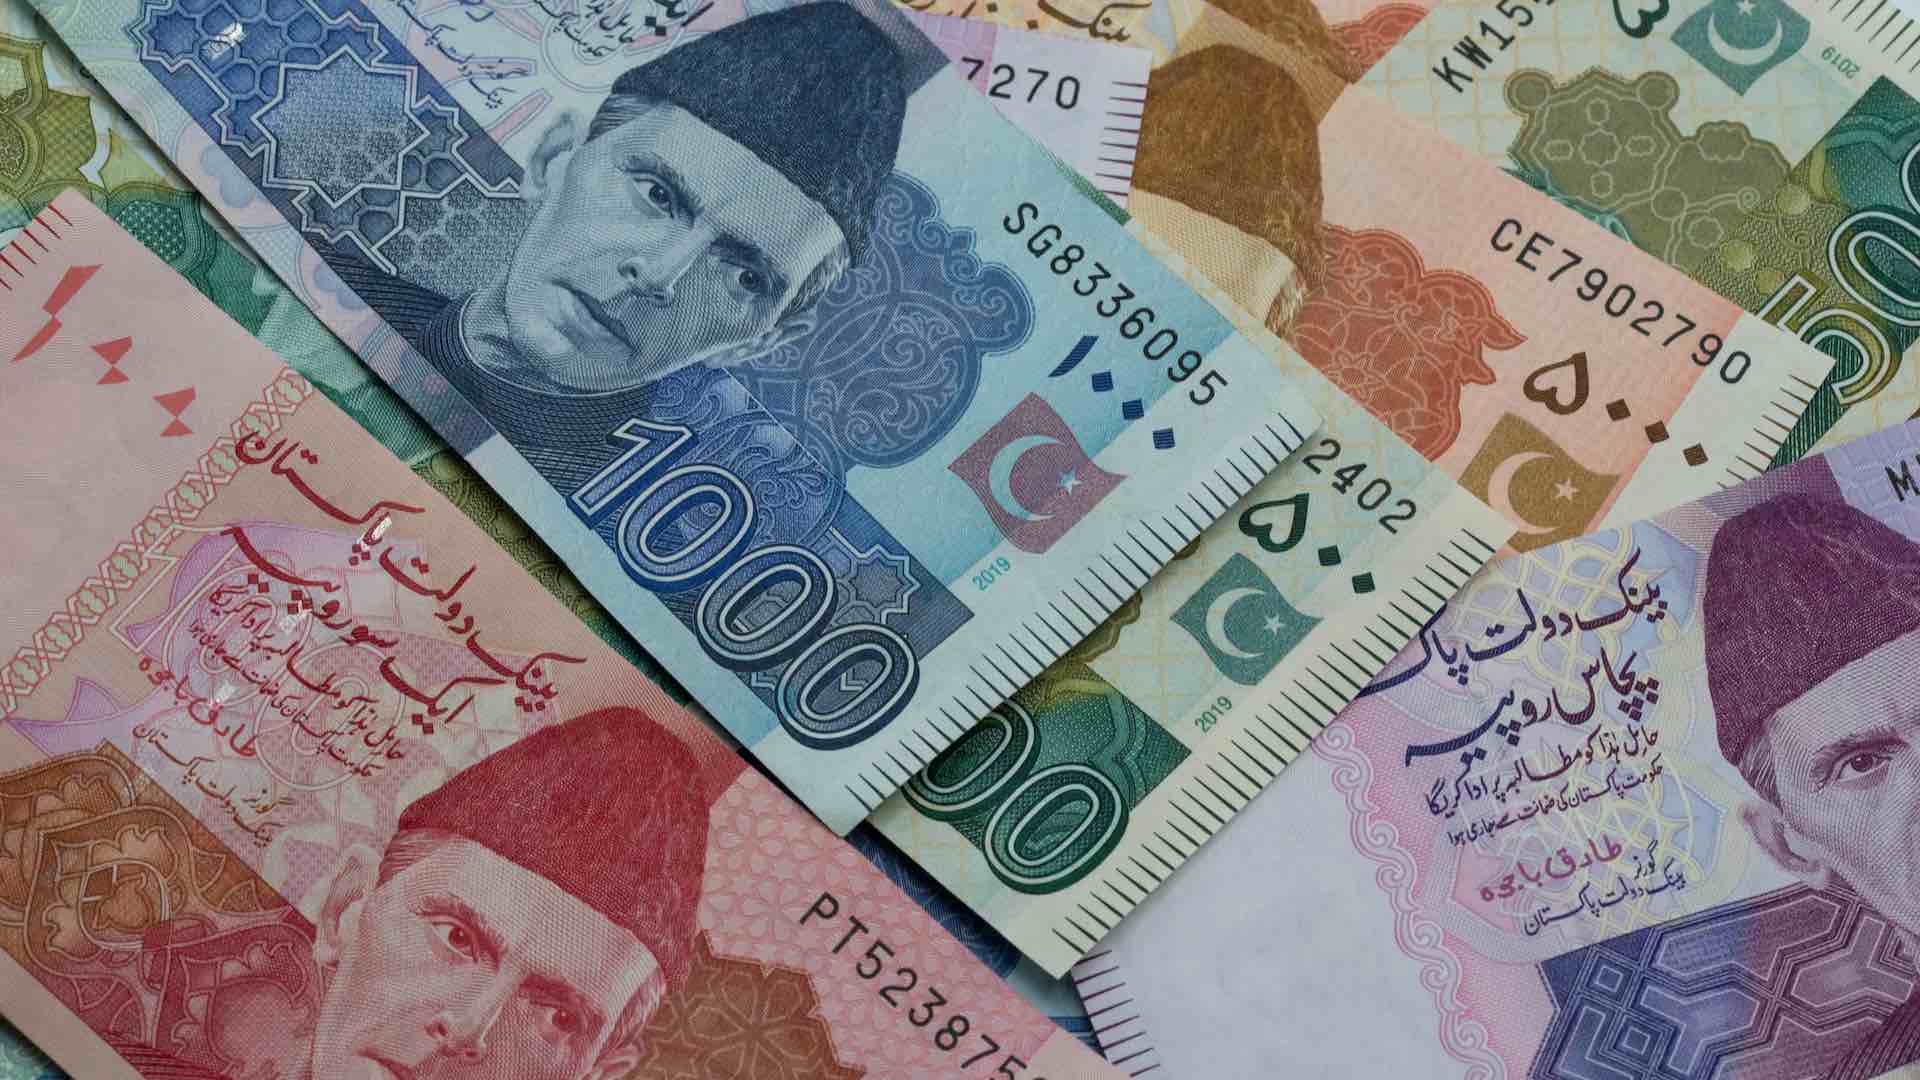 Amid political turmoil, Pakistan's currency faces historic low